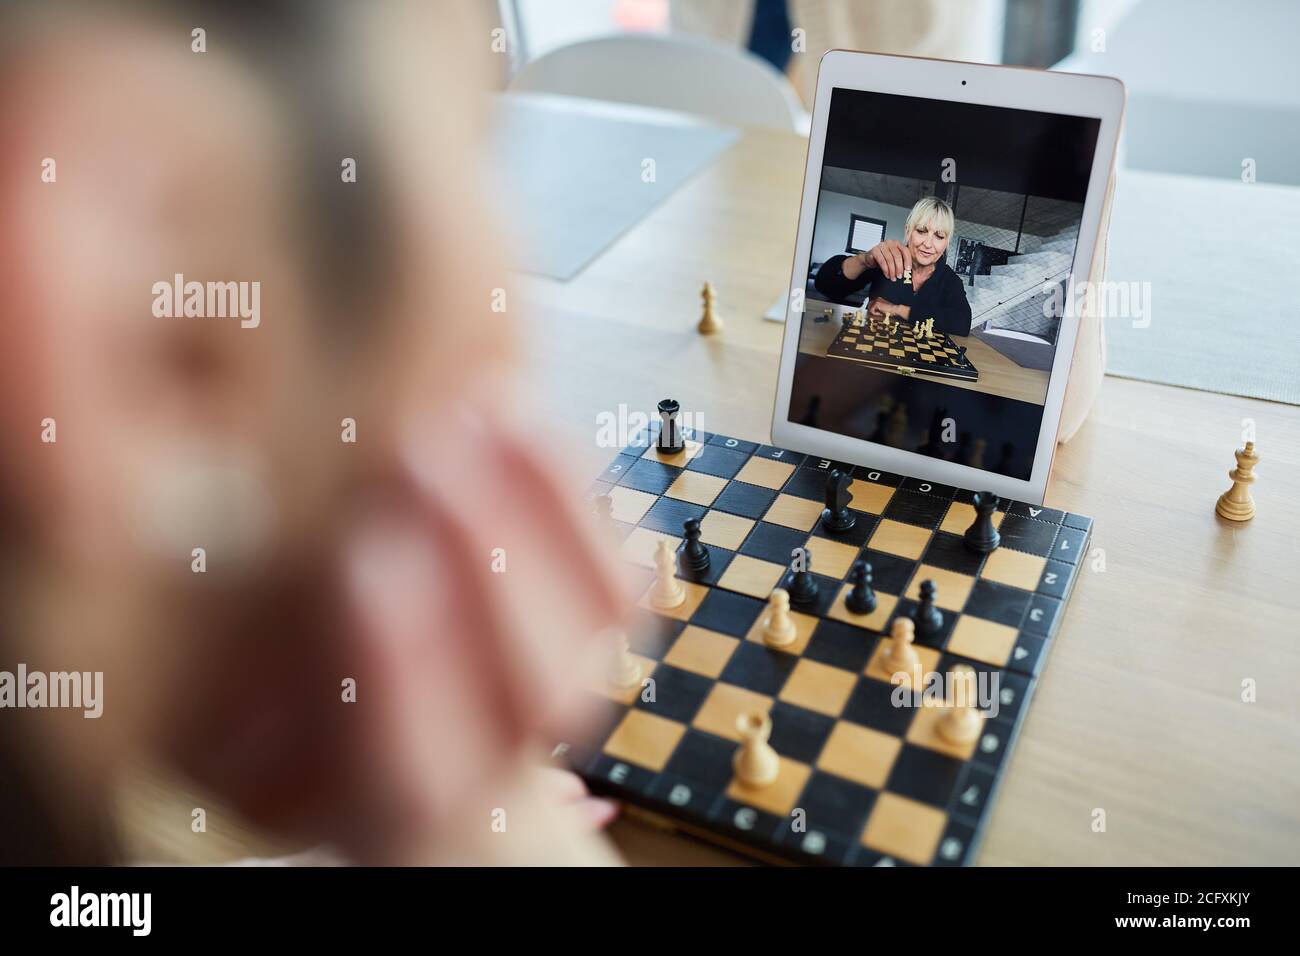 Premium Photo  Woman playing chess online on tablet computer